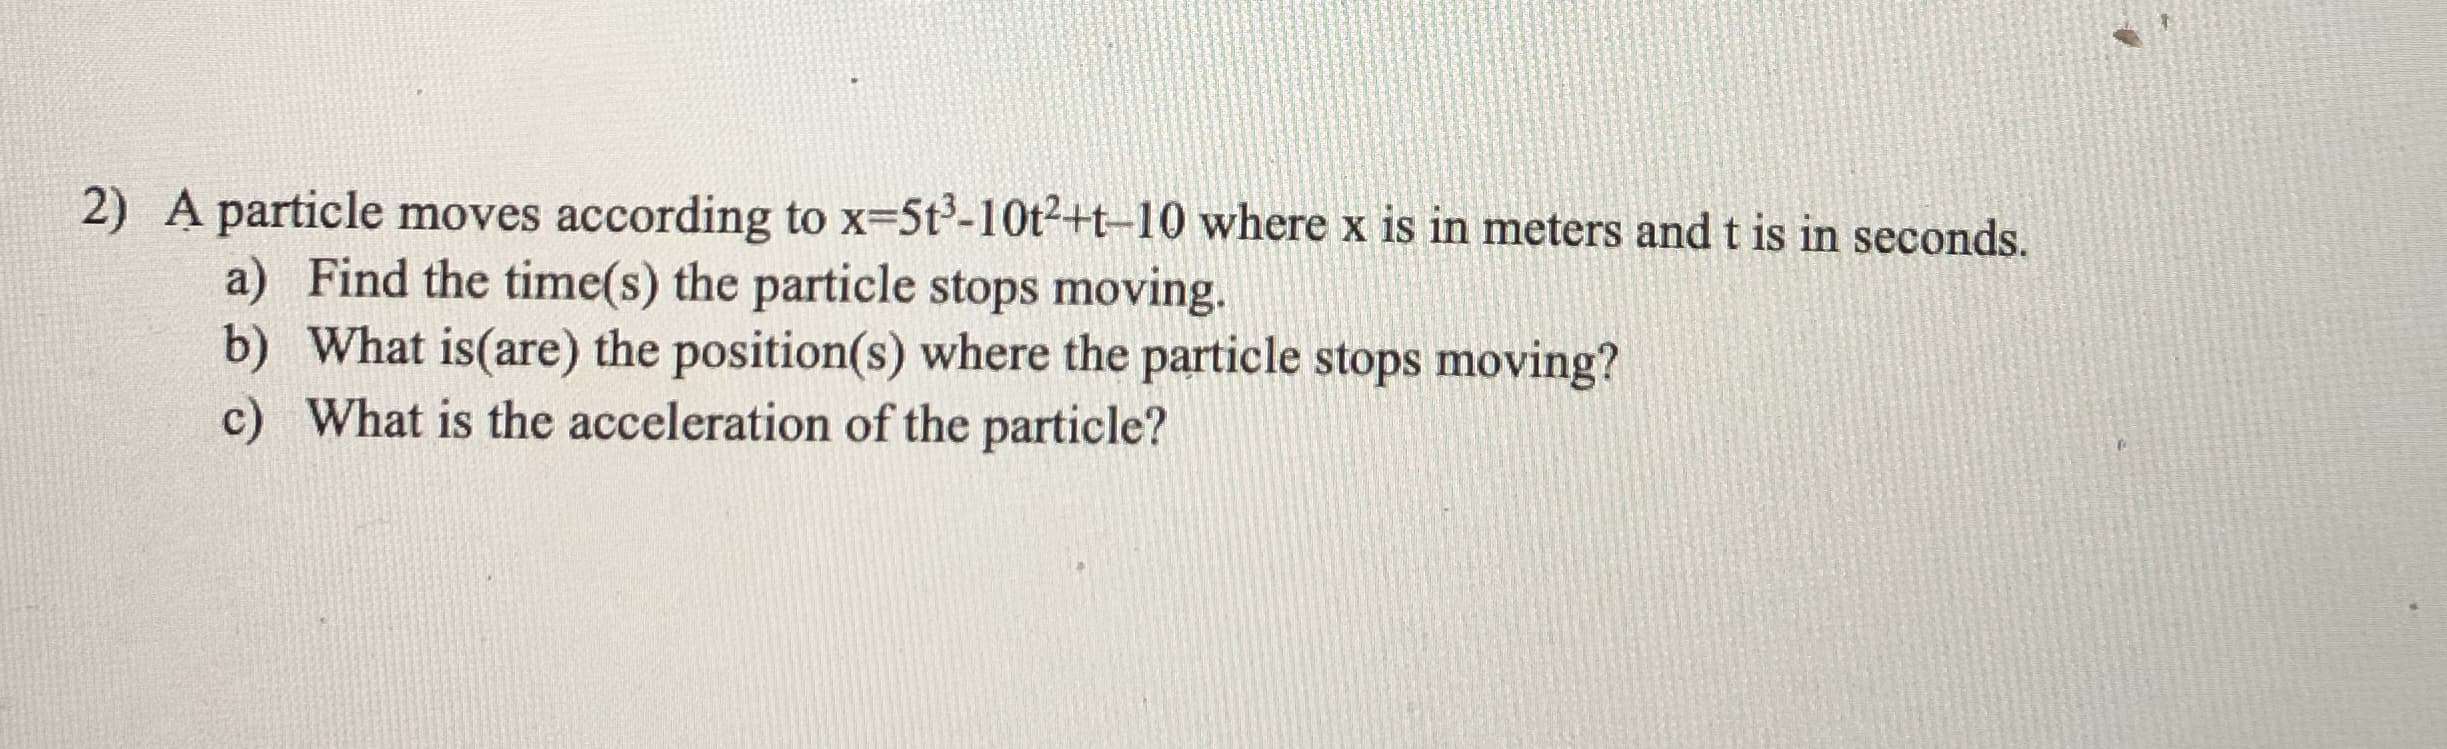 2) A particle moves according to x-5t-10t²+t-10 where x is in meters and t is in seconds.
a) Find the time(s) the particle stops moving.
b) What is(are) the position(s) where the particle stops moving?
c) What is the acceleration of the particle?
